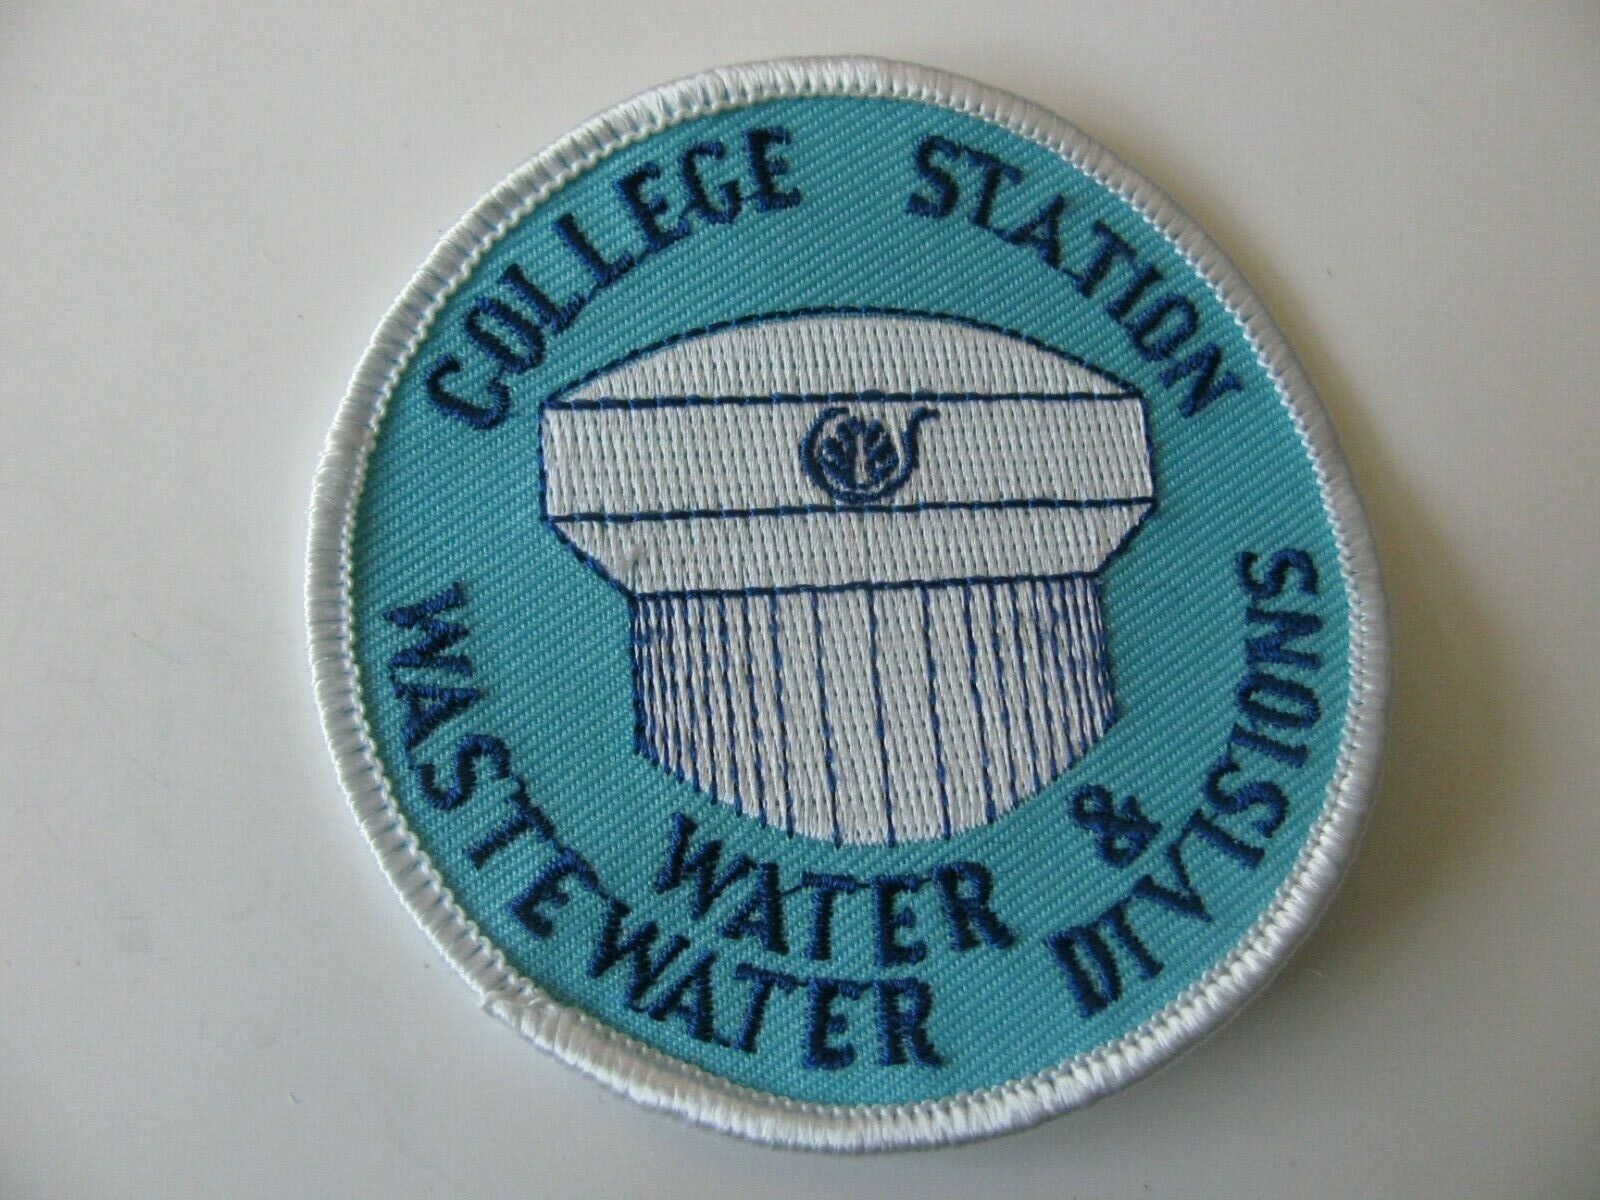 College Station  Texas TX  Water Wastewater Divisions Patch Iron On 3” Rare Logo